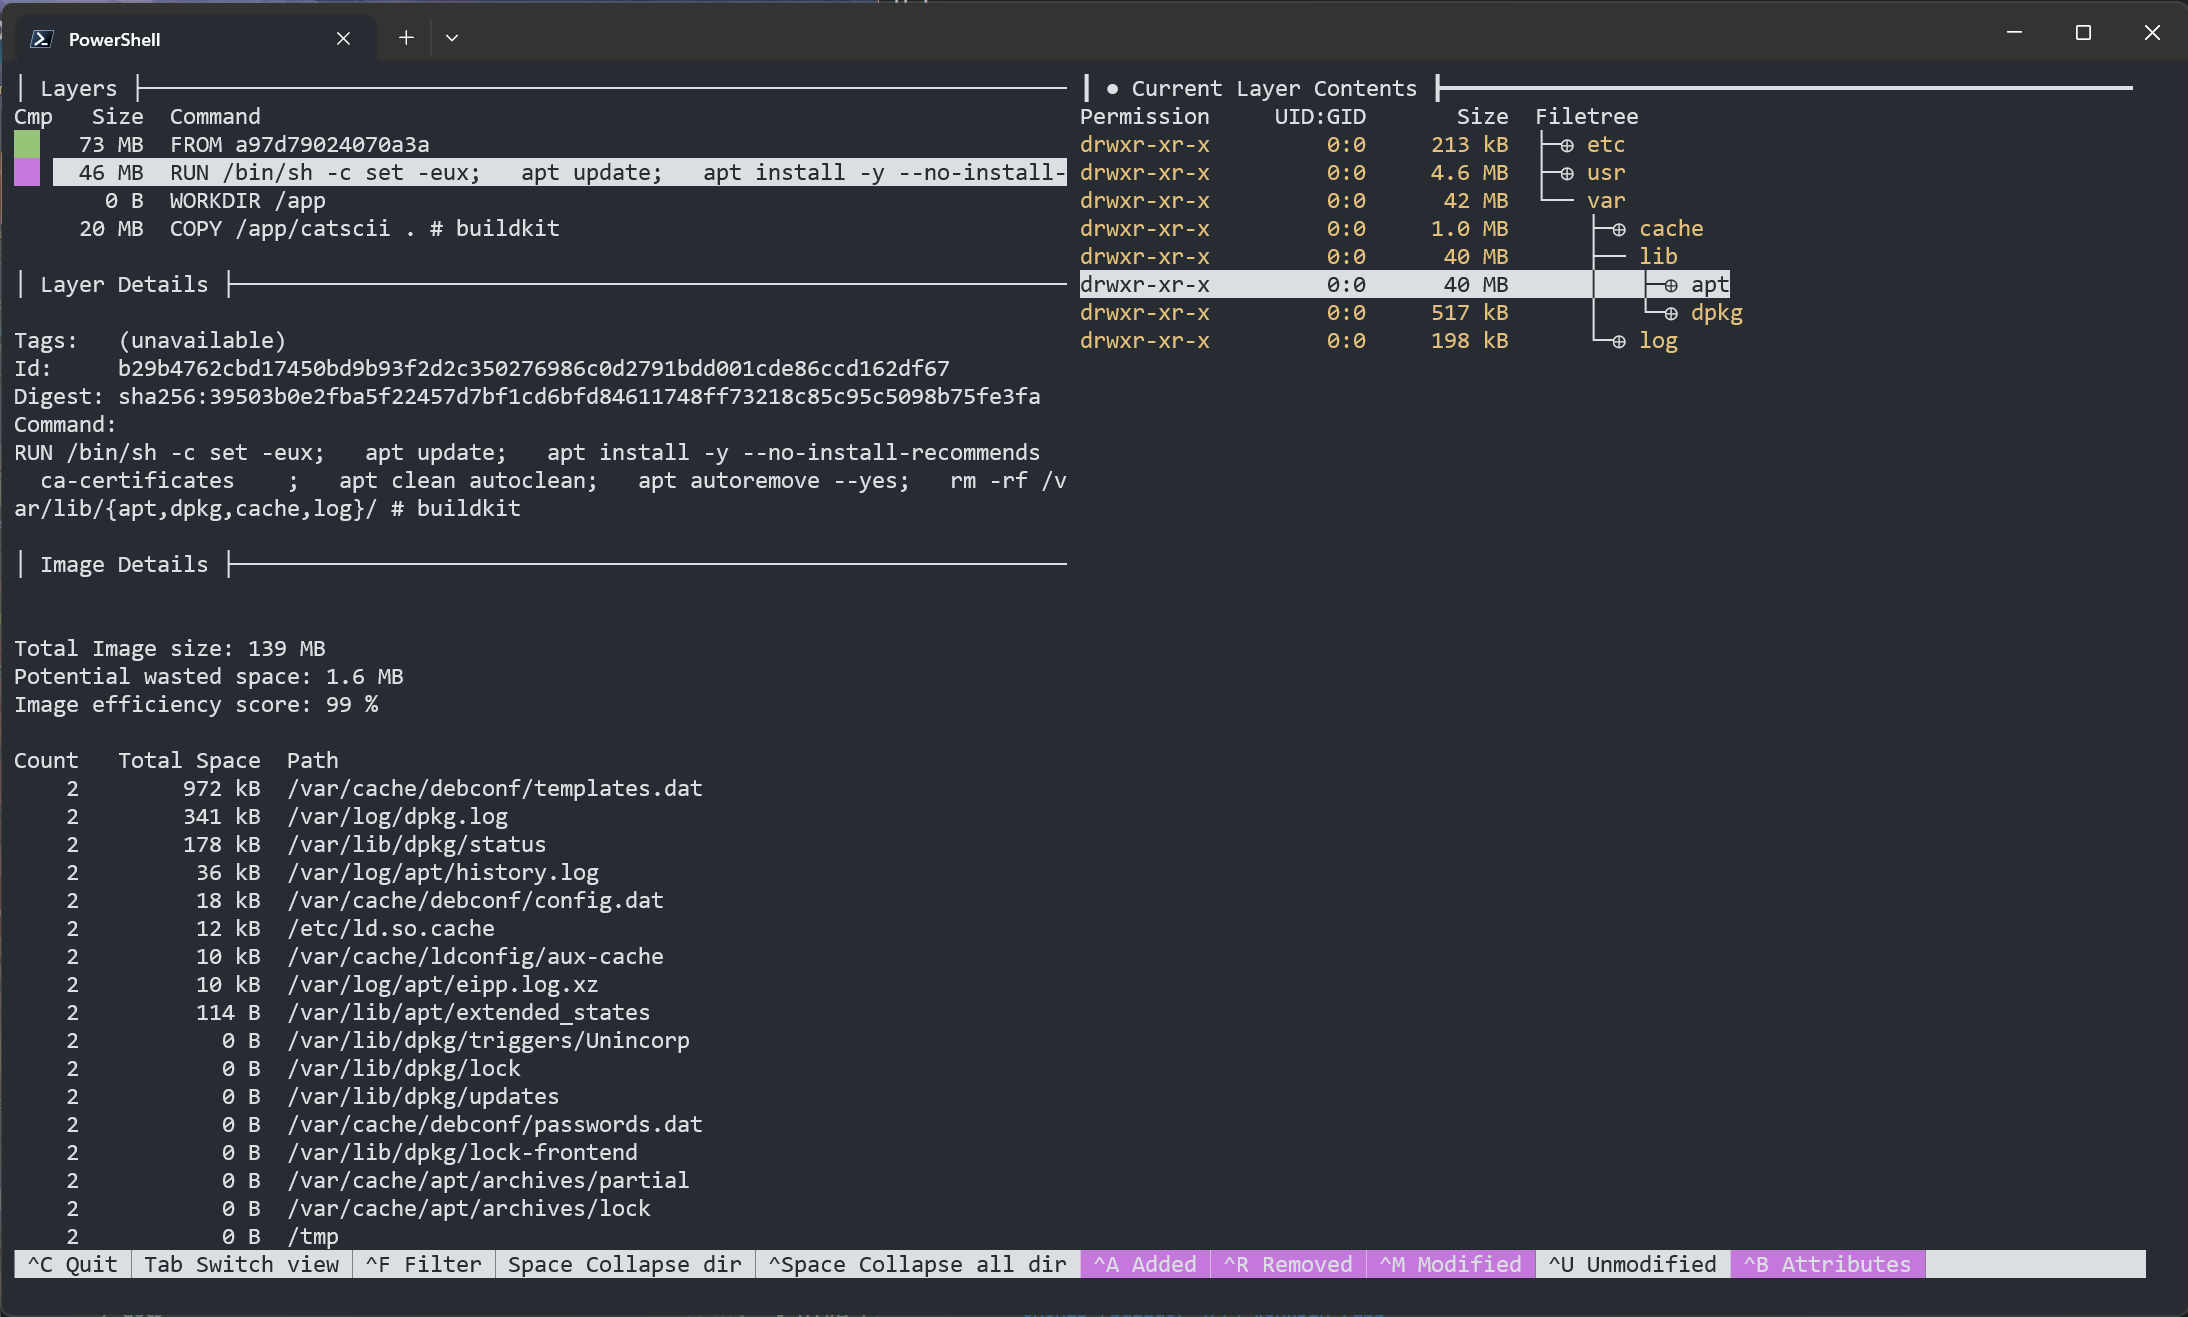 Terminal screenshot, shows the dive text-based UI. On the left there's a panel that shows various layers. The focused layer is the one that installs runtime dependencies. On the right is a panel with the current layer contents. The var folder is 42MB, which is suspicious